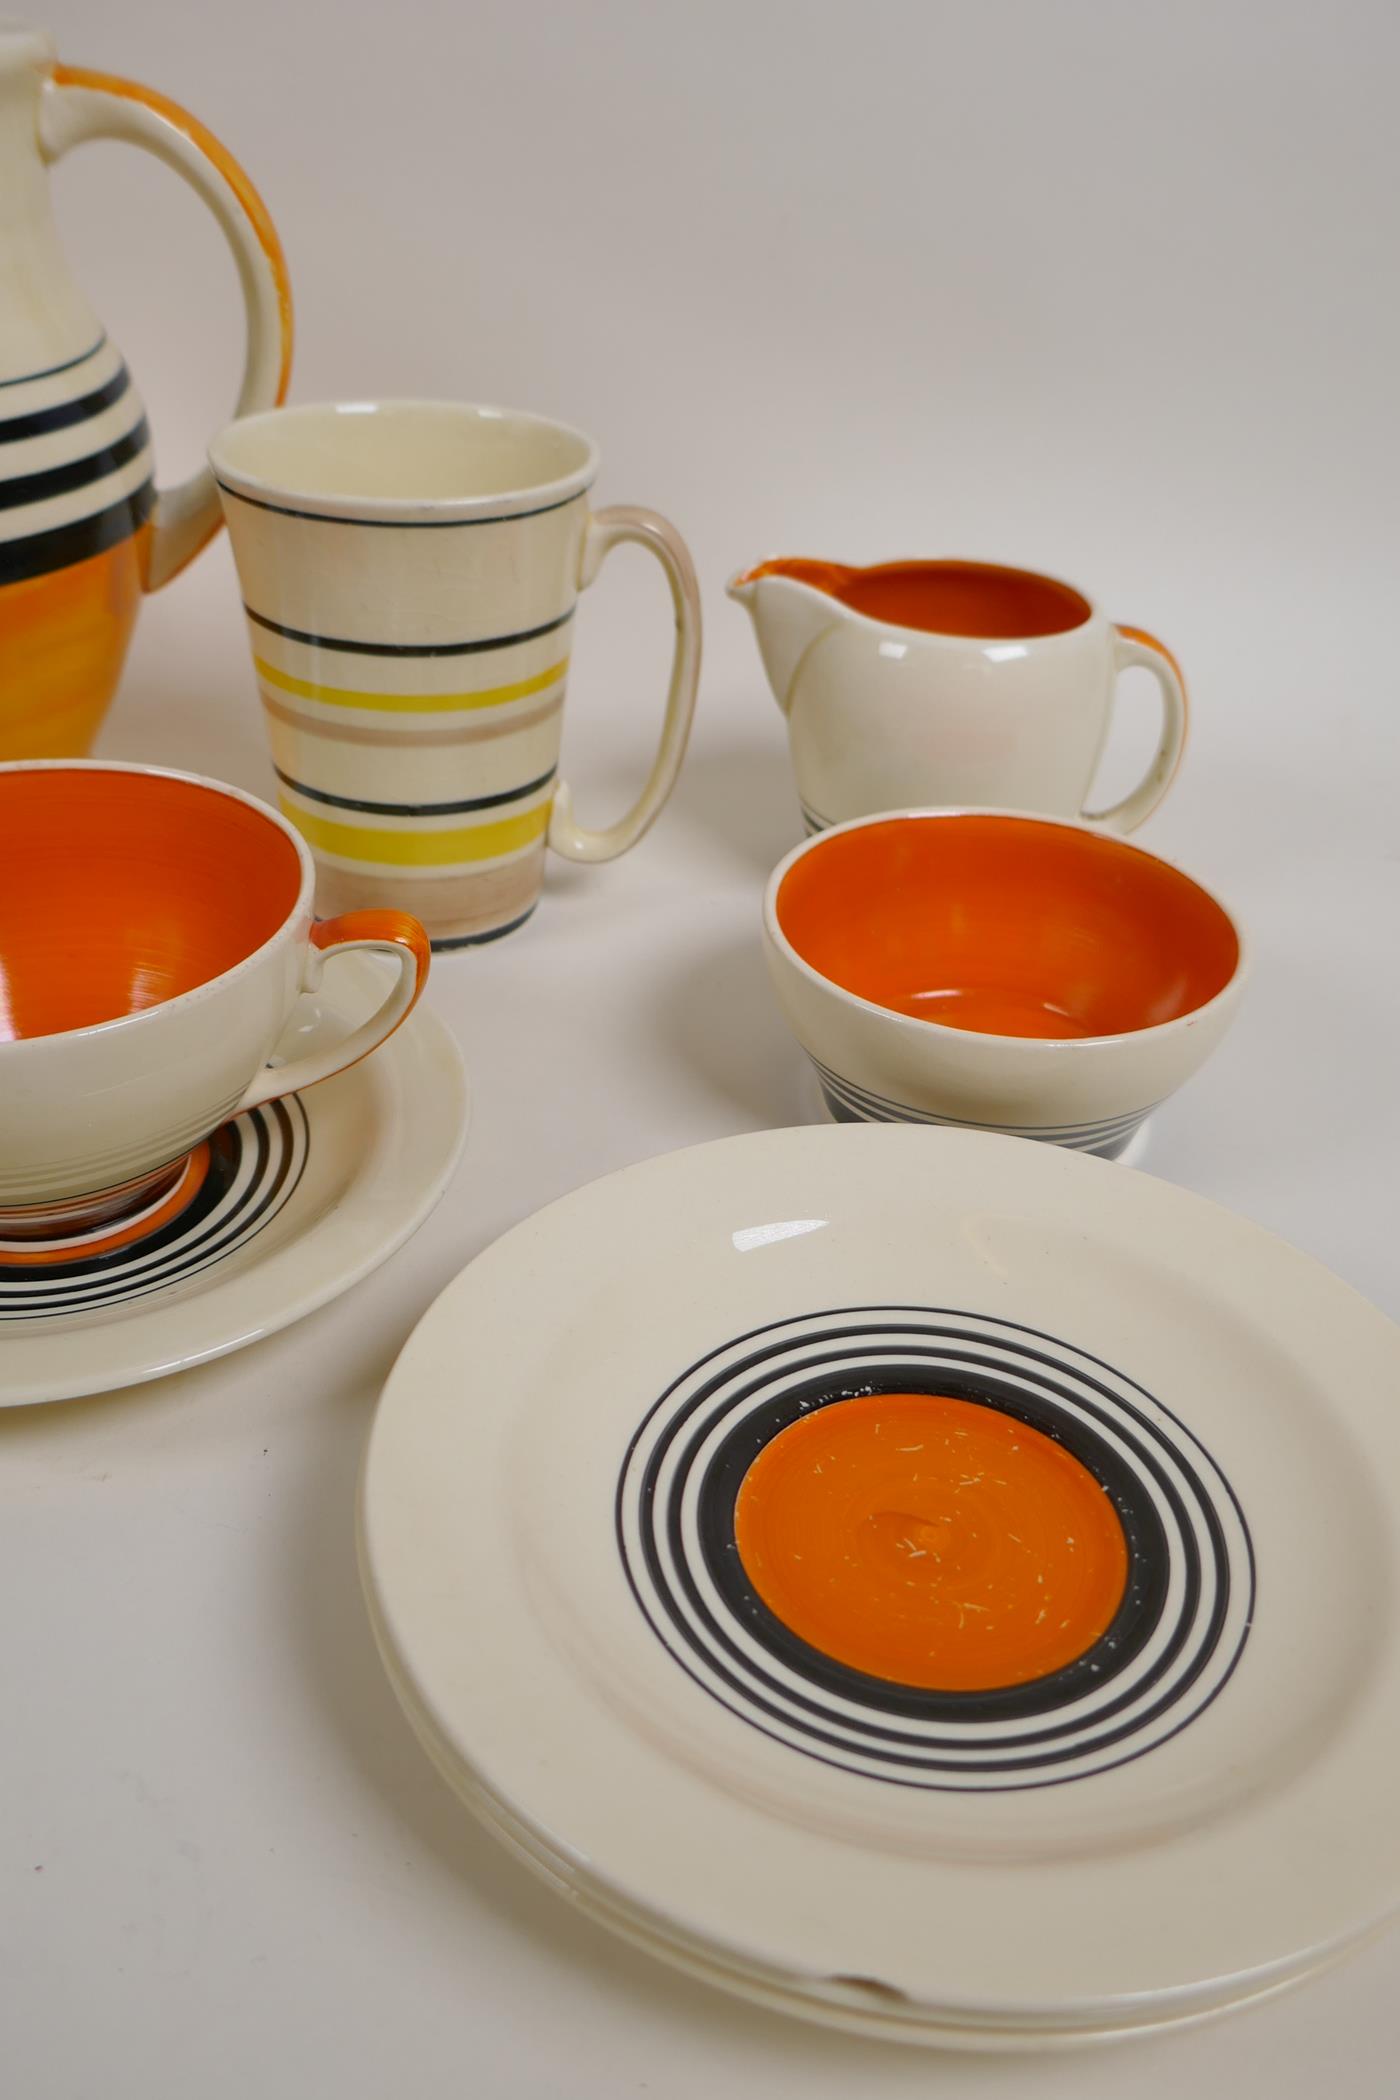 A quantity of Susie Cooper productions orange Tango pattern tea wares, including tea cups, - Image 5 of 8